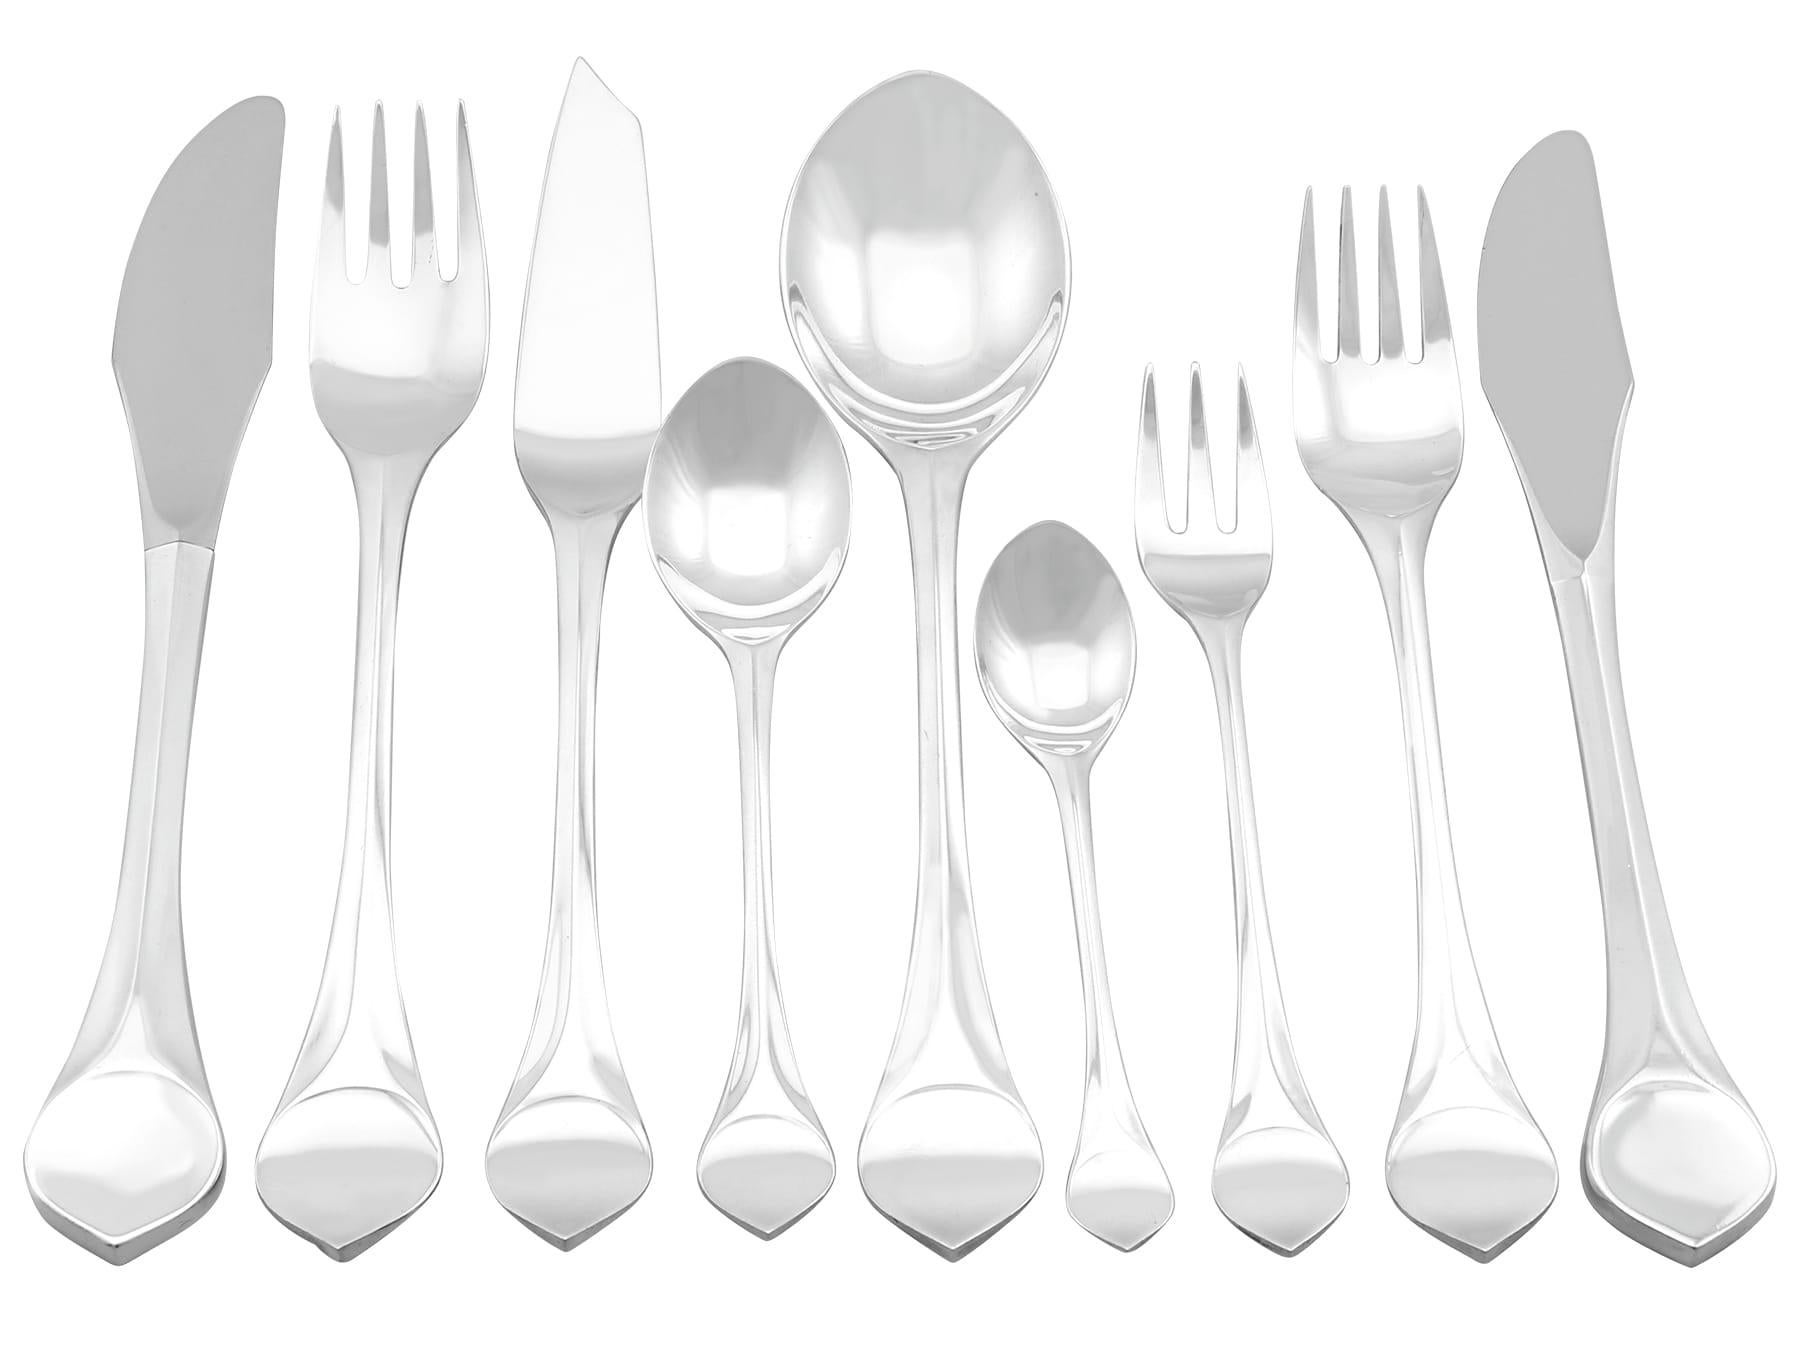 An exceptional, fine and impressive vintage German sterling silver Lotus pattern canteen of cutlery for twelve persons made by Rosenthal; an addition to our antique flatware sets

The pieces of this exceptional and extensive vintage German sterling